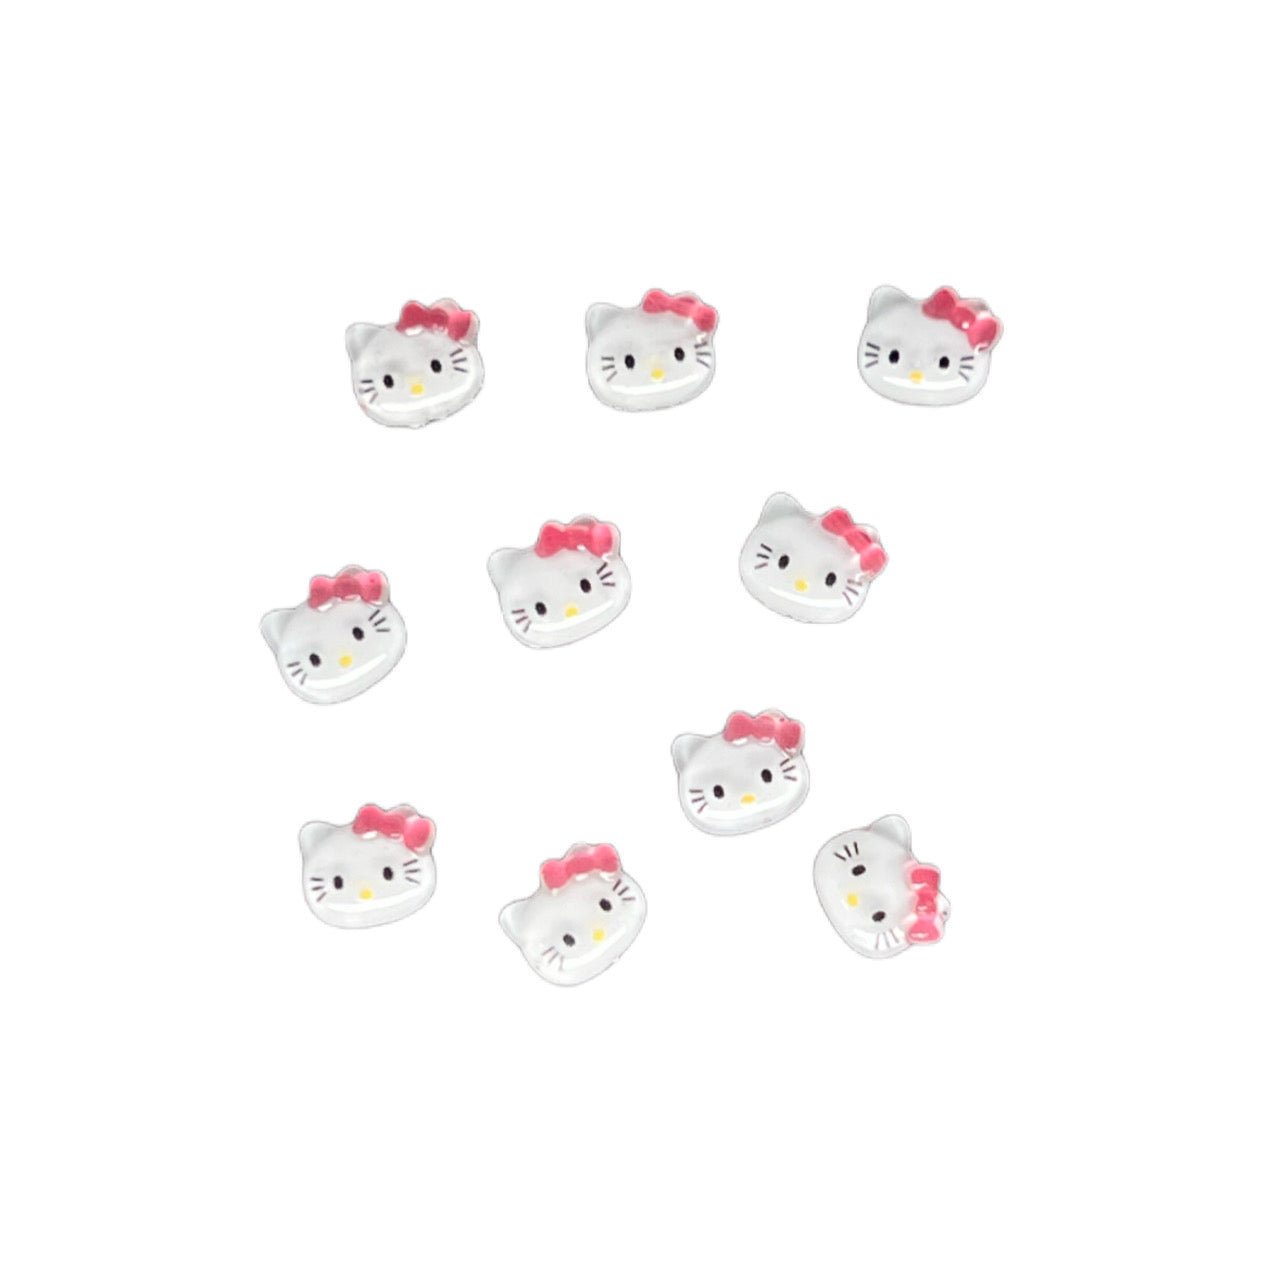 Love hello kitty charms 🤍 #fyp #nailtech #nailinspo #hellokittynails , nails with charms